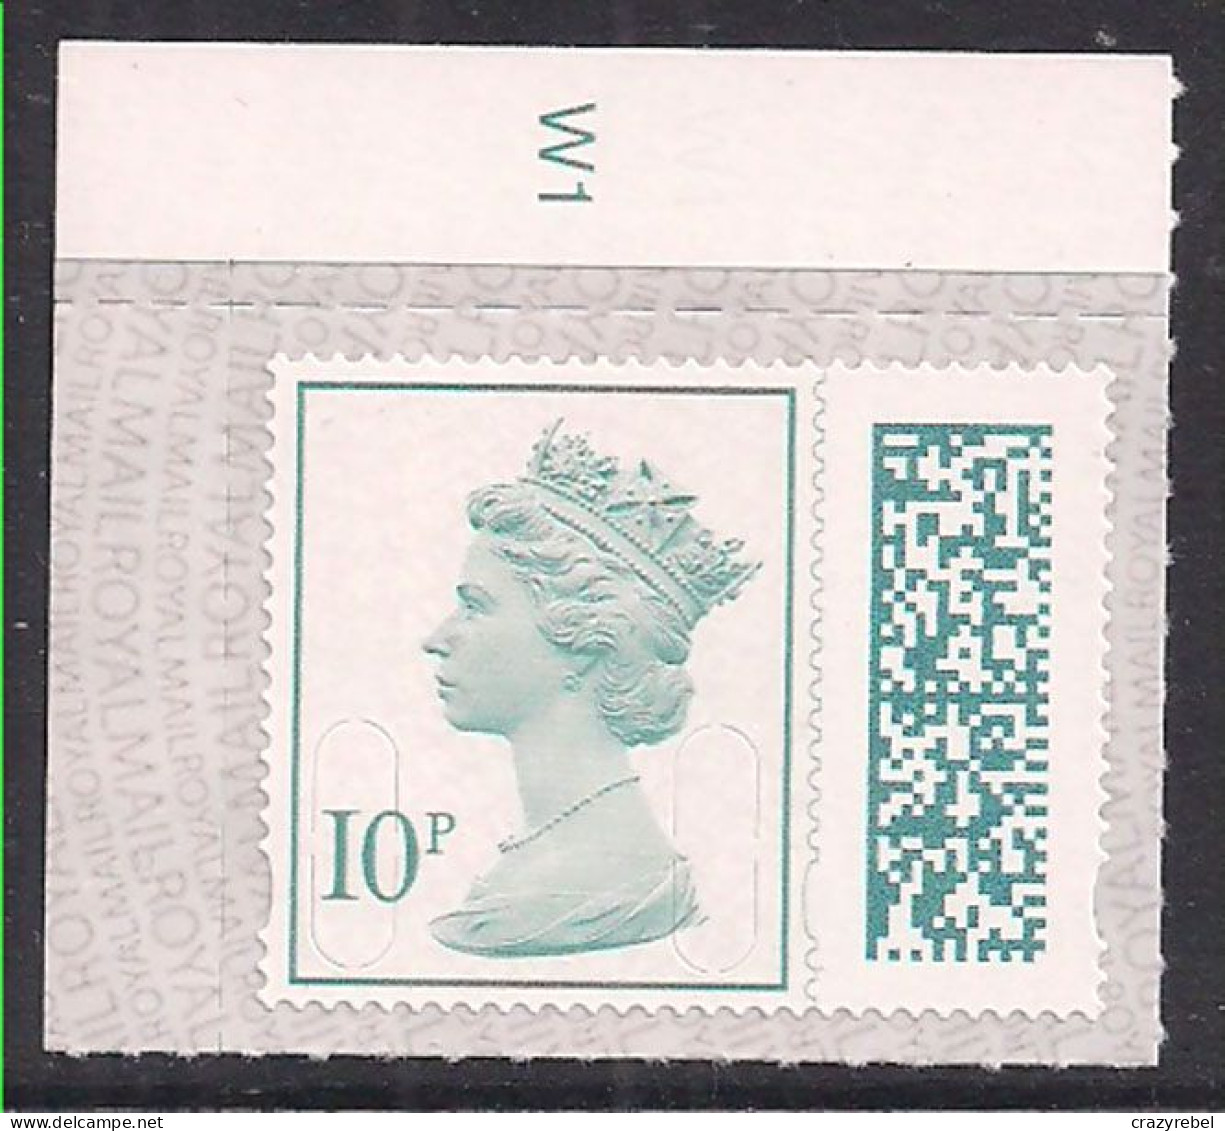 GB 2022 QE2 10p Green Barcoded Machin SG V4710 Umm MAIL ( G1295 ) - Unused Stamps